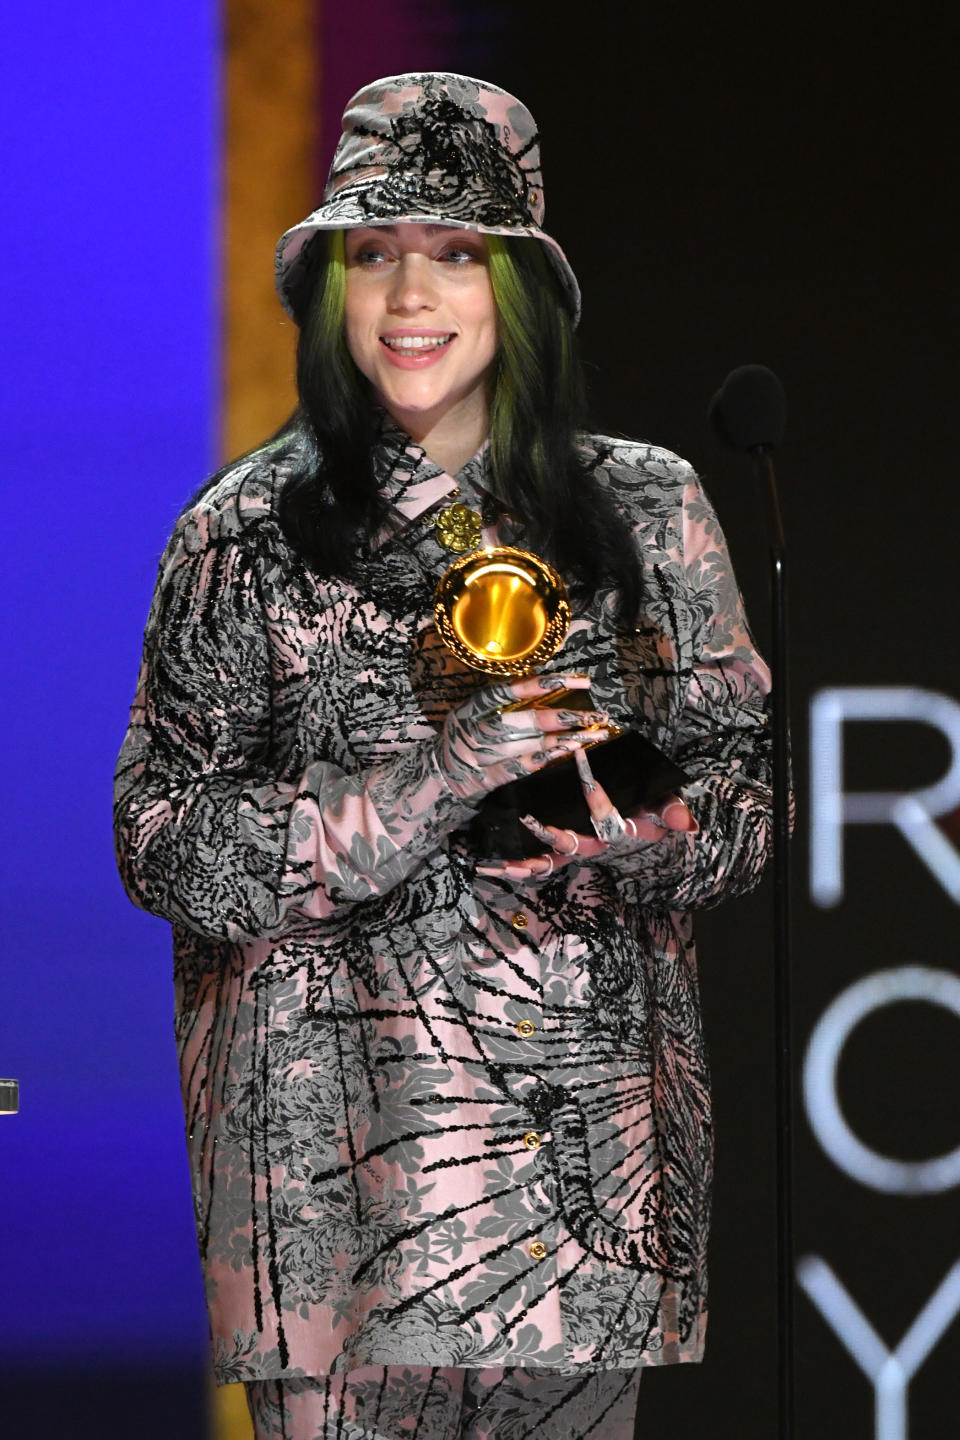   Kevin Winter / Getty Images for The Recording Academy